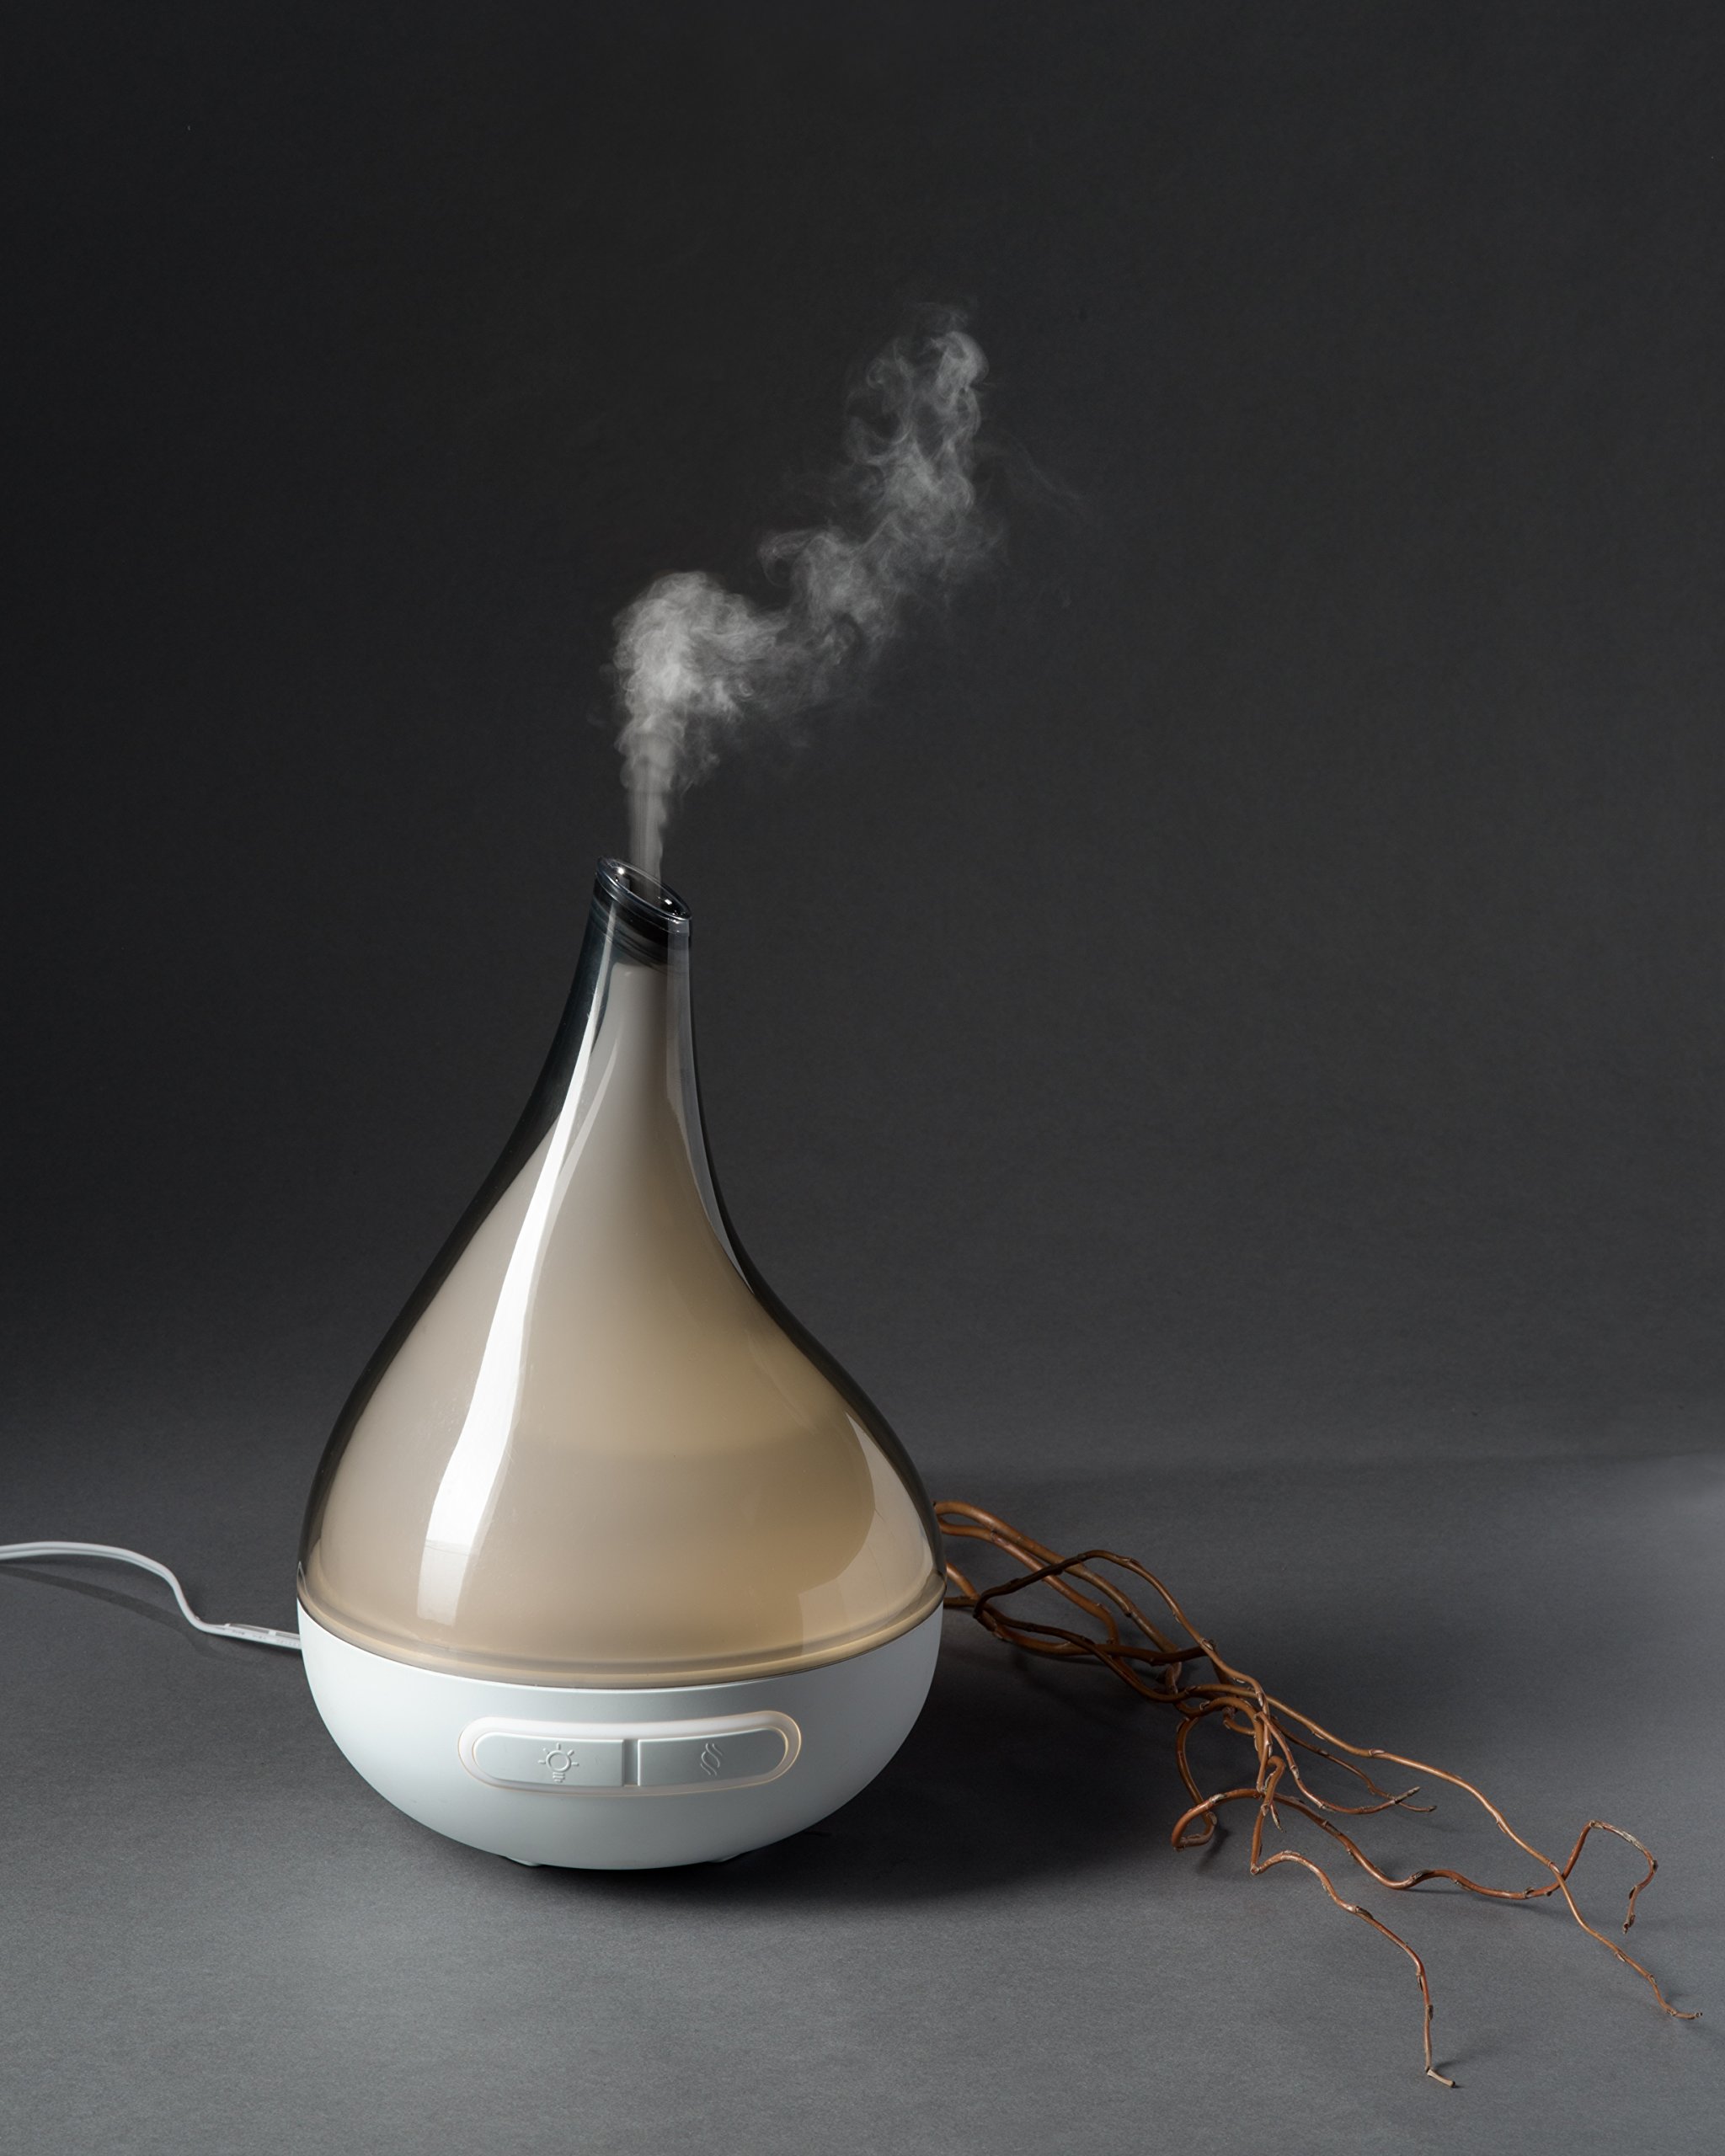 Top 5 Nebulizer Diffusers for Essential Oils and Buying Guide